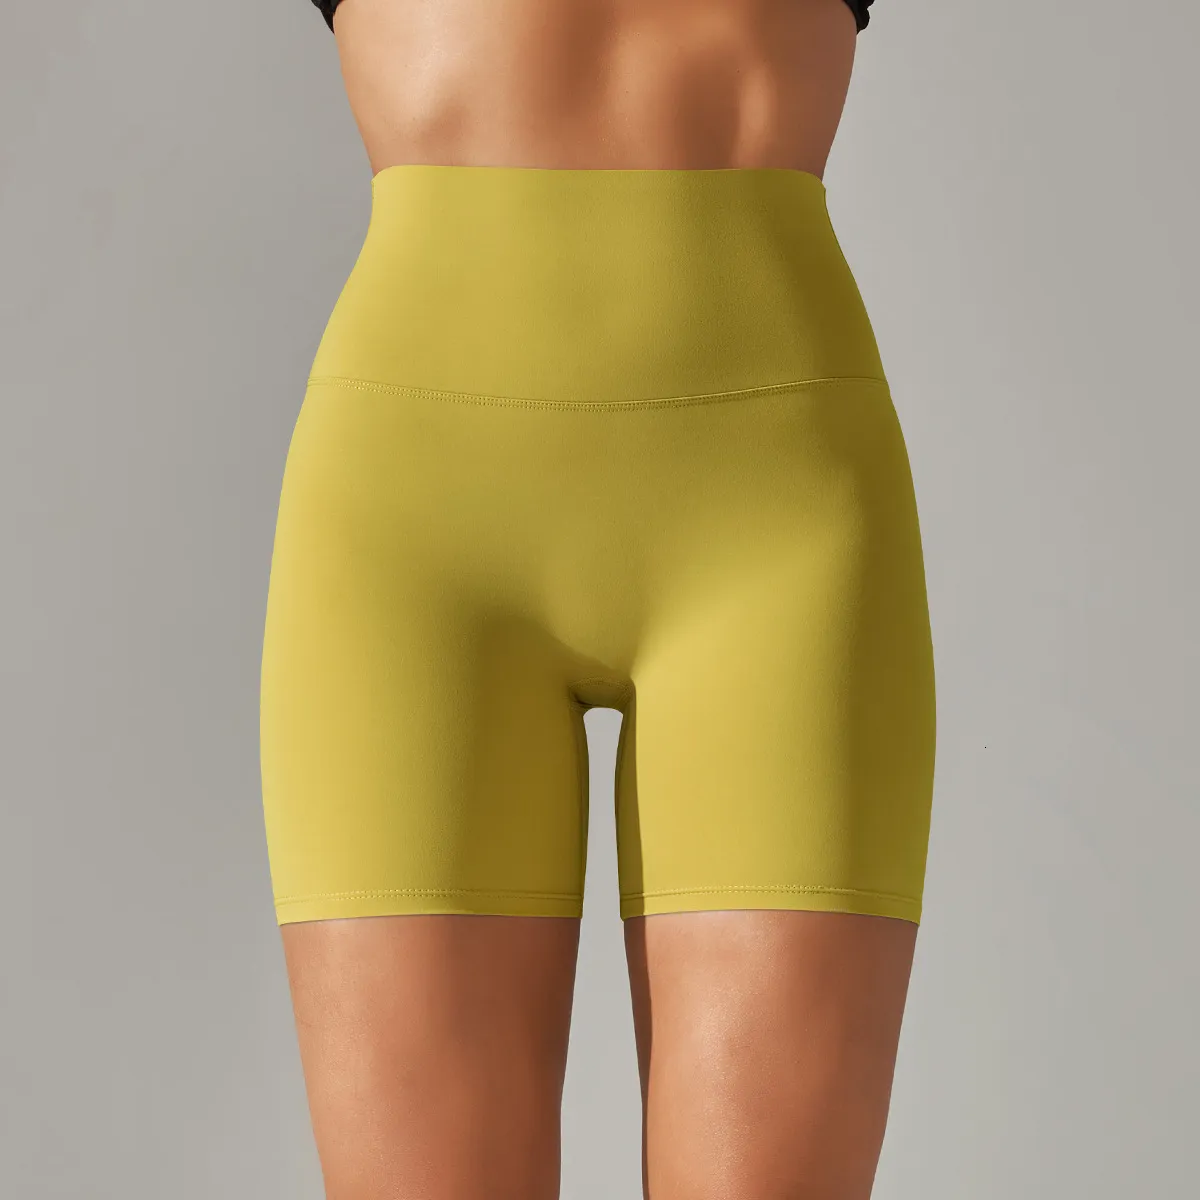 Womens High Waist Butter Soft Squat Proof Yoga Shorts For Fitness, Cycling,  Athletic Gym From Chao07, $16.55